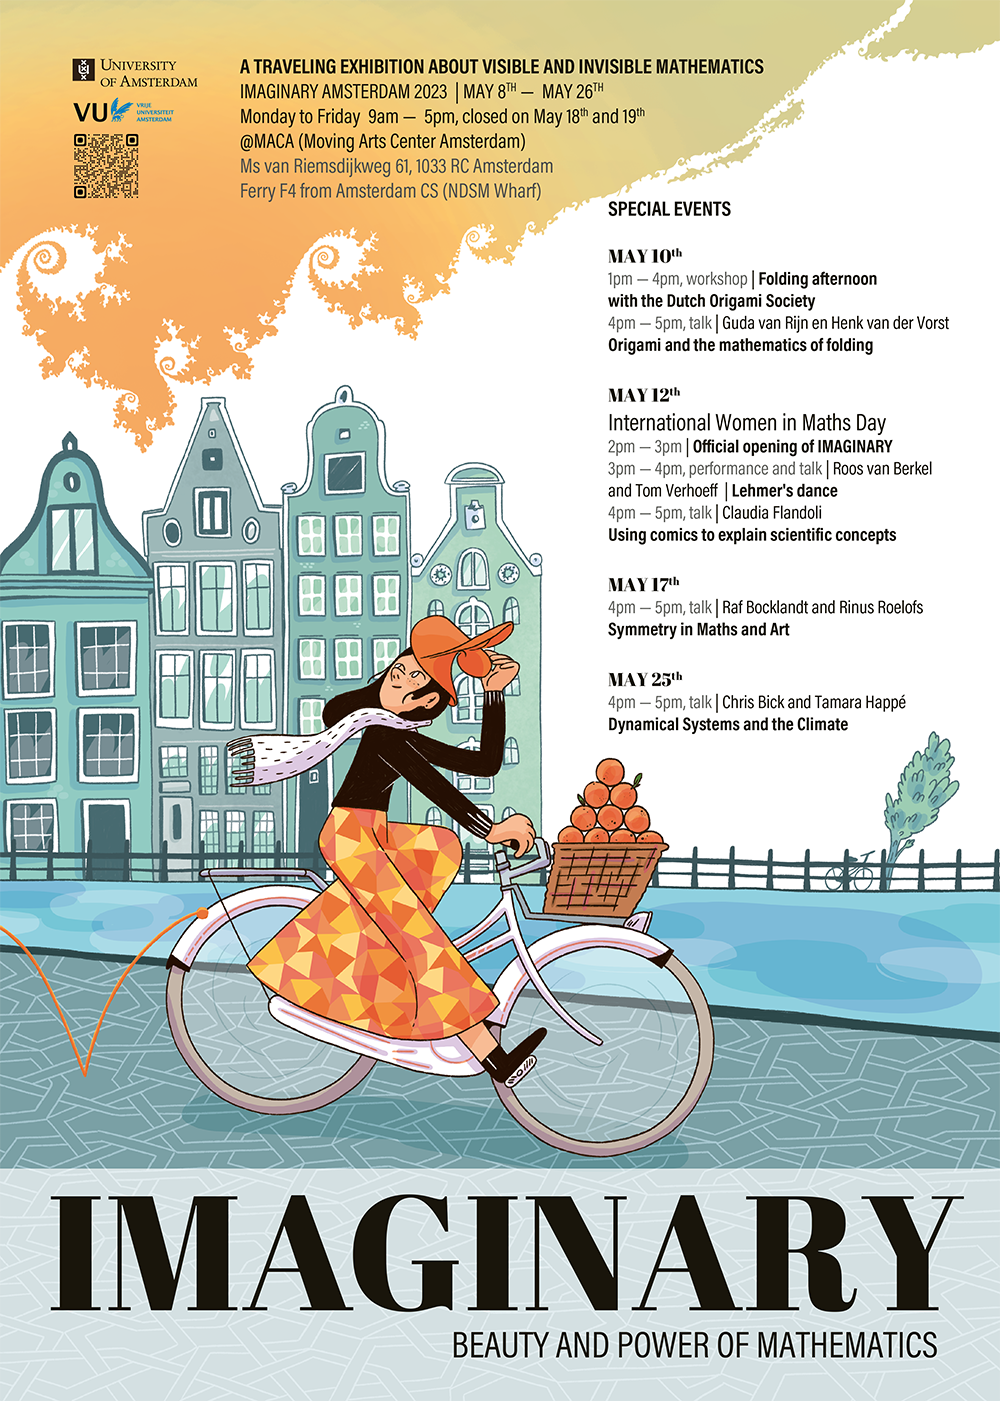 Poster of the special events connected to Imaginary in Amsterdam, May 2023